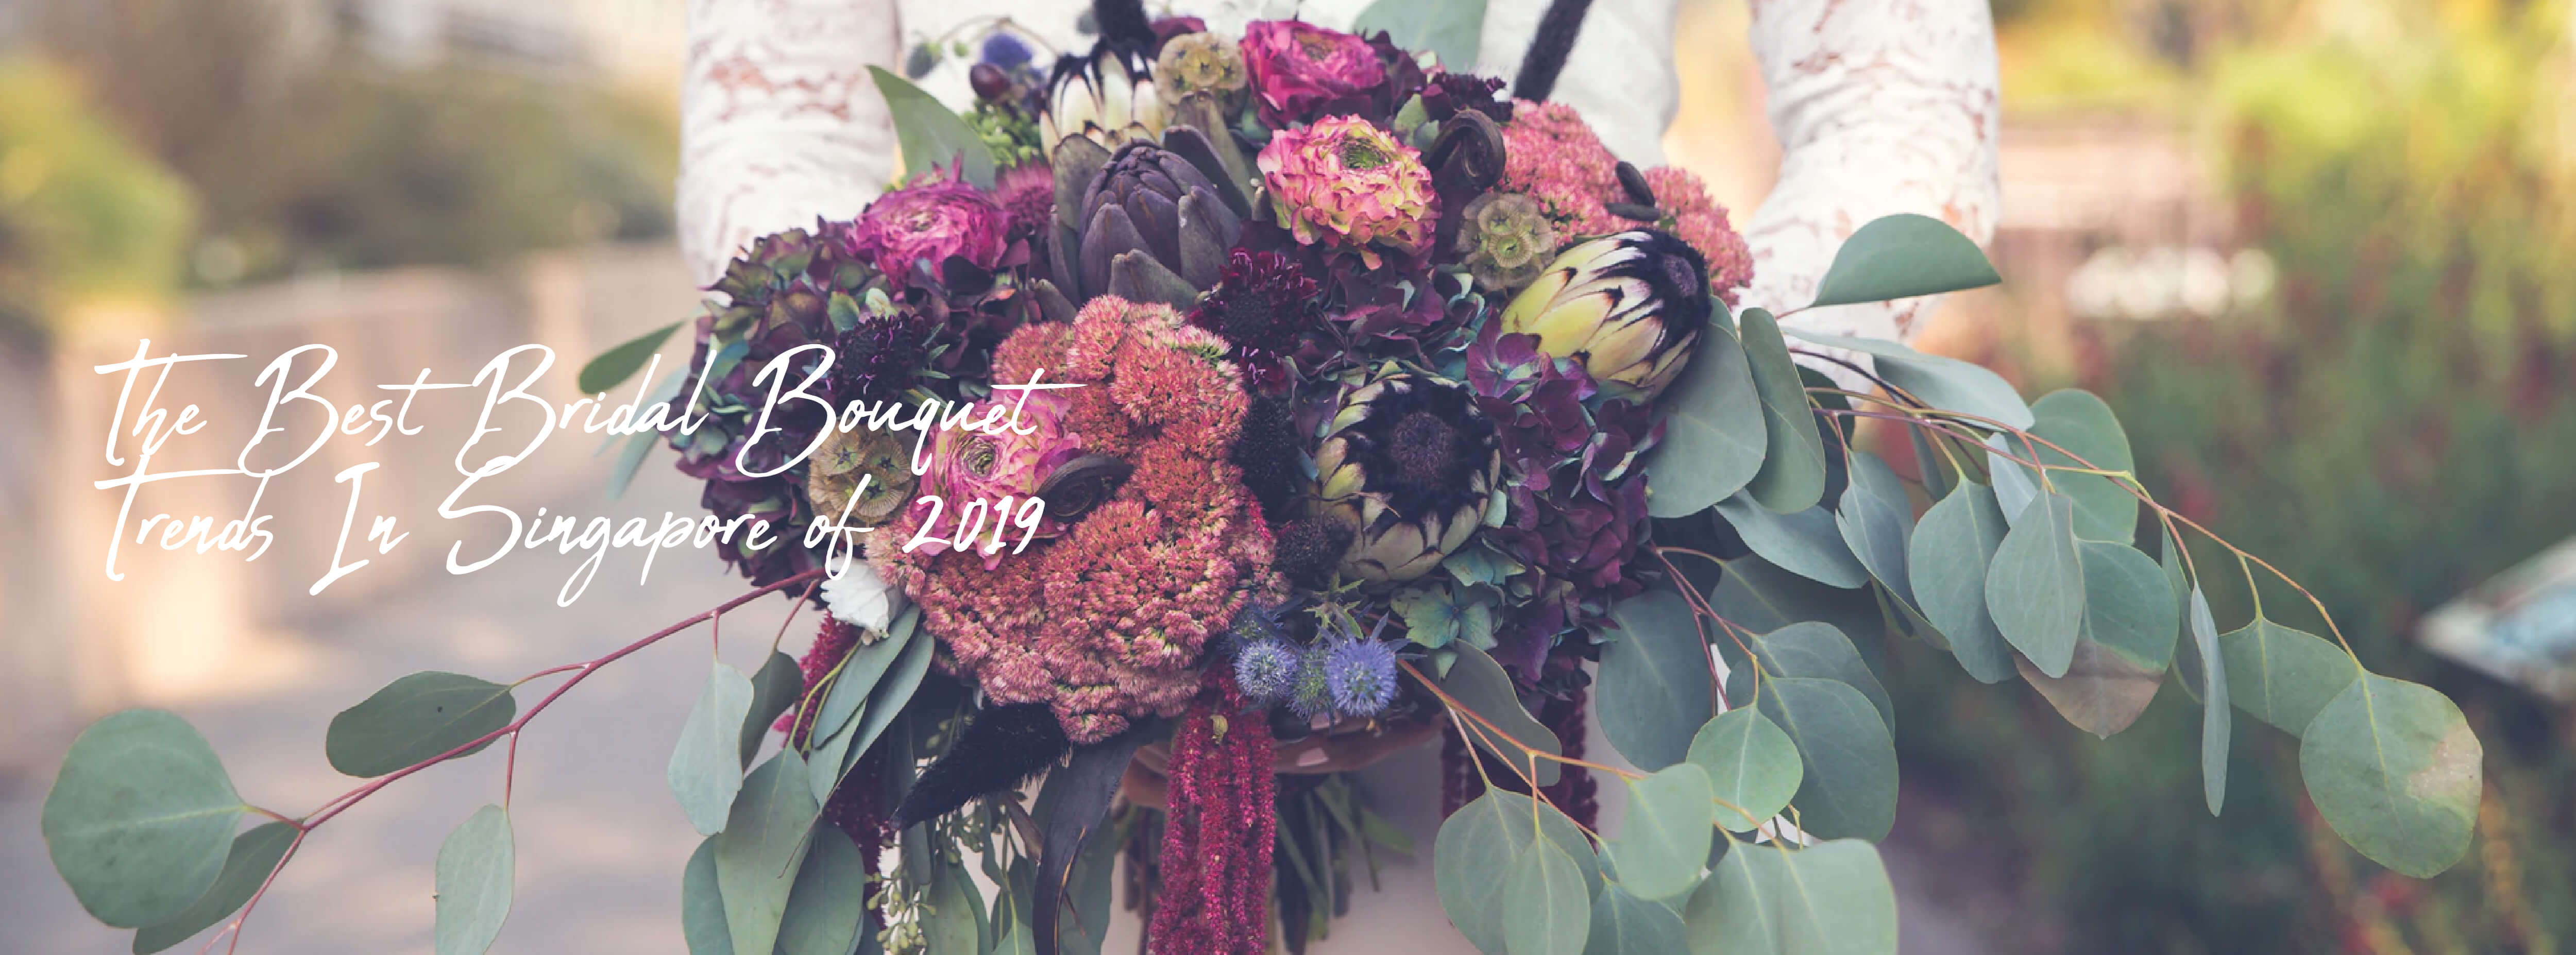 The Best Bridal Bouquet Trends In Singapore of 2019